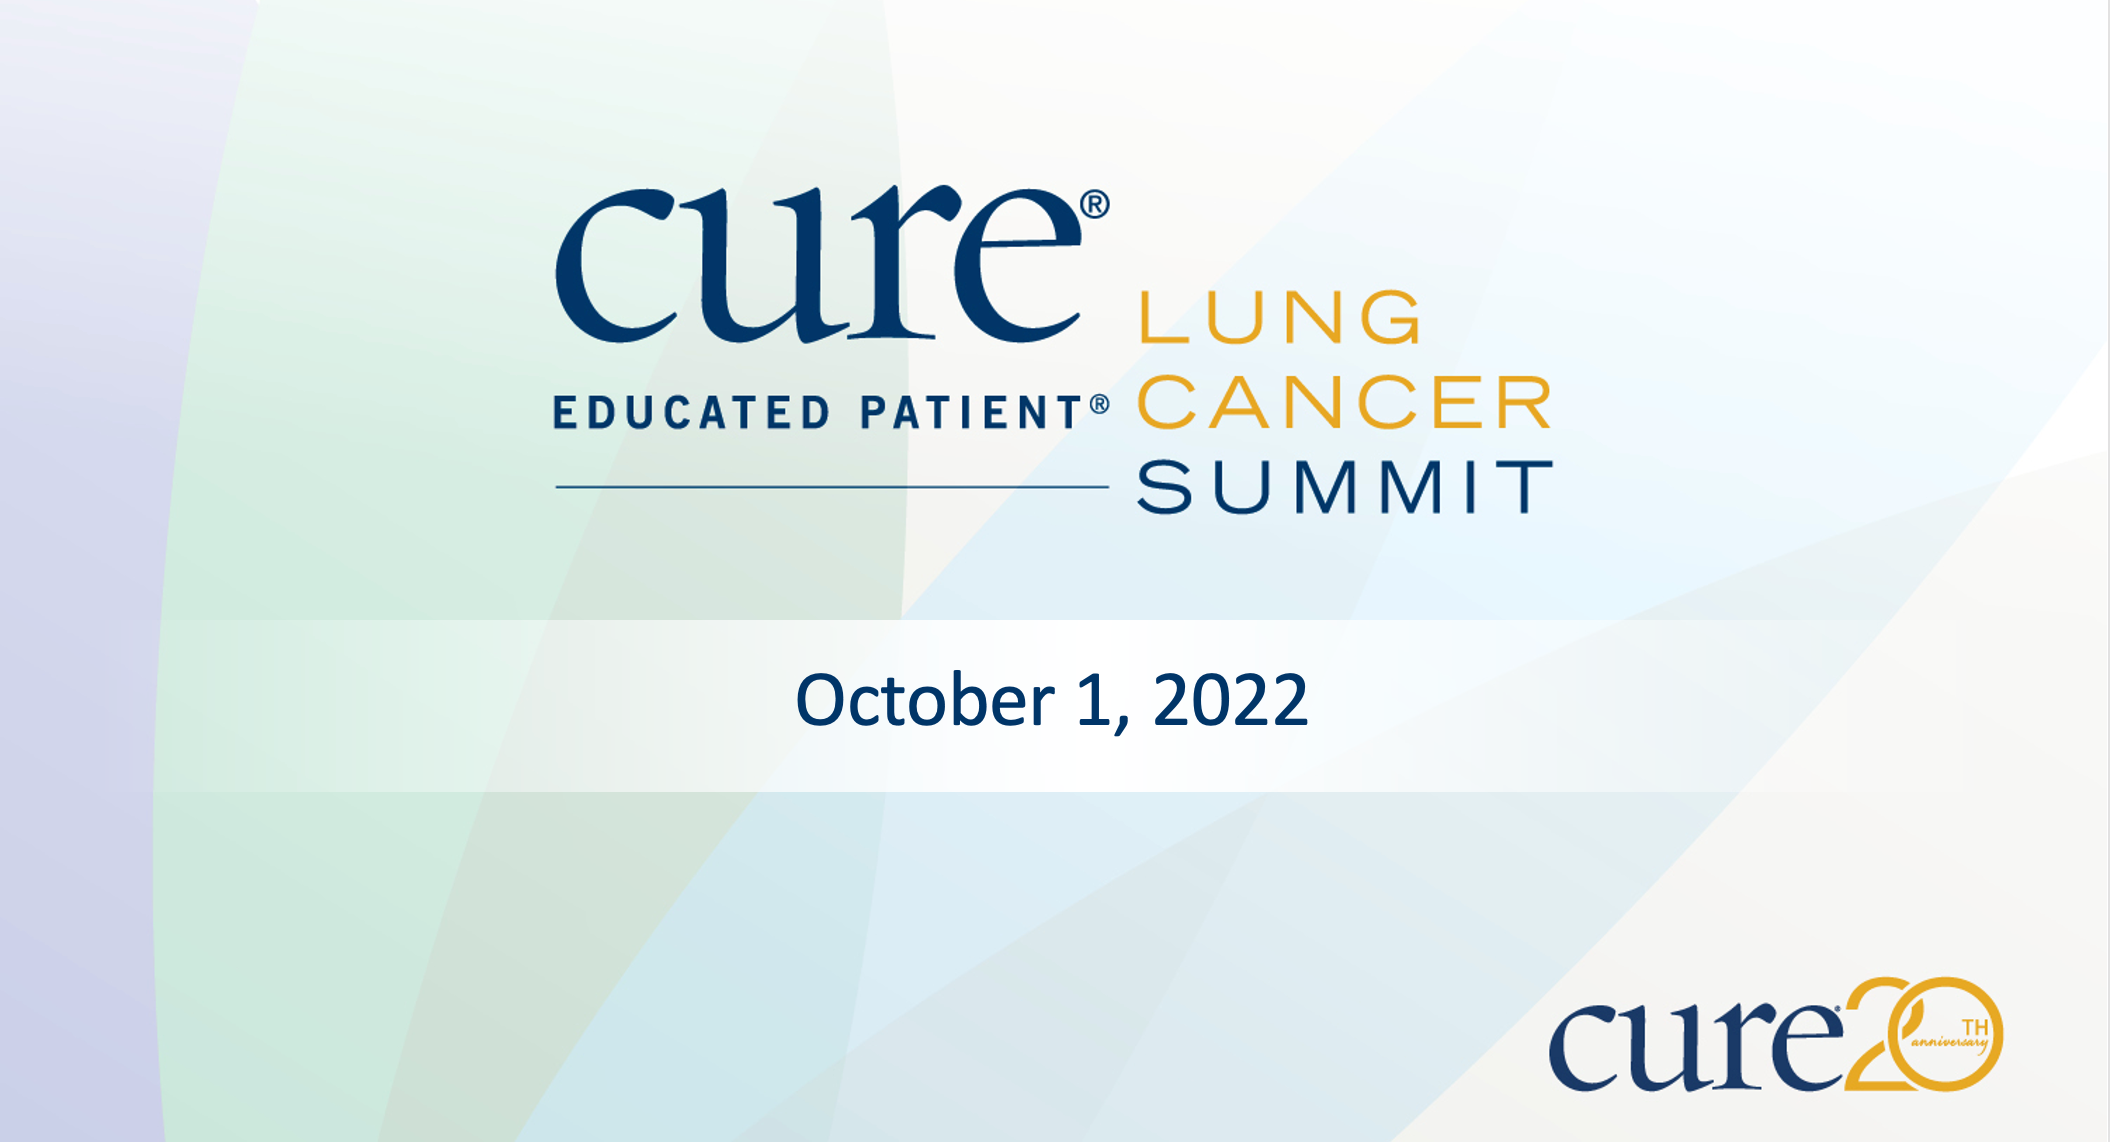 CURE Educated Patient Lung Cancer Summit